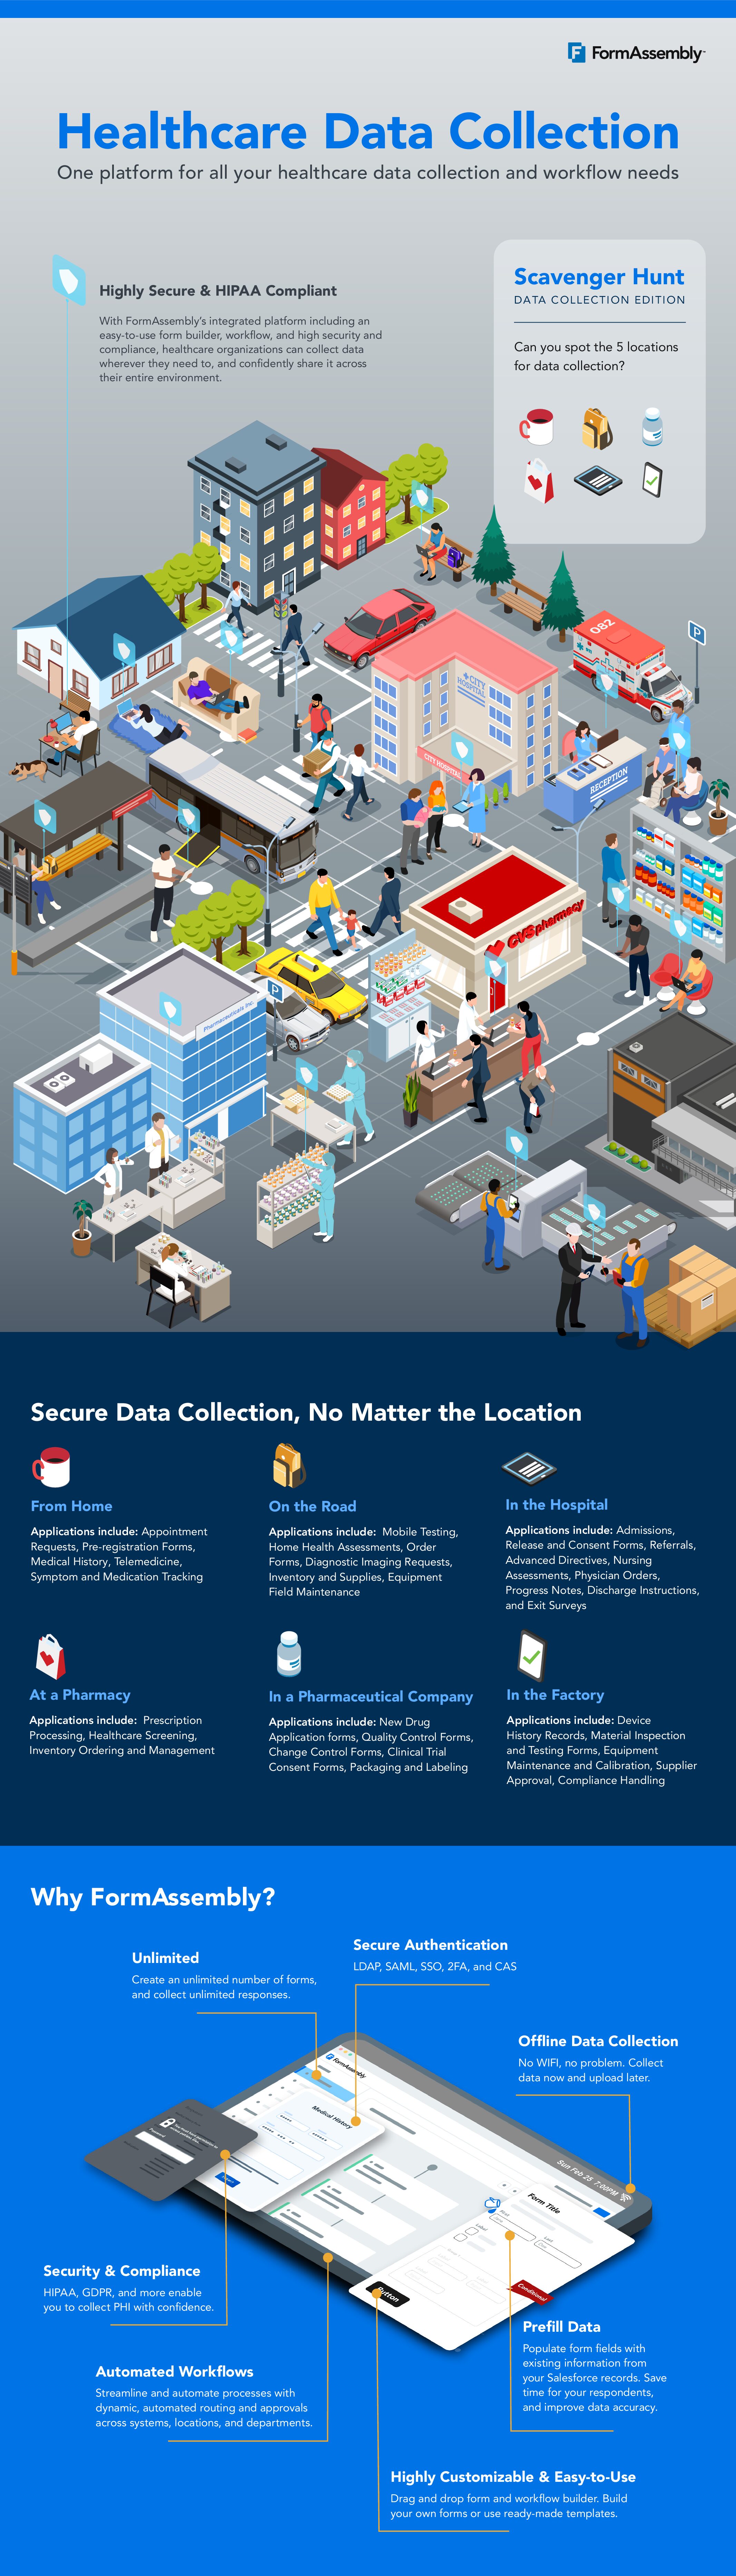 Healthcare data collection infographic